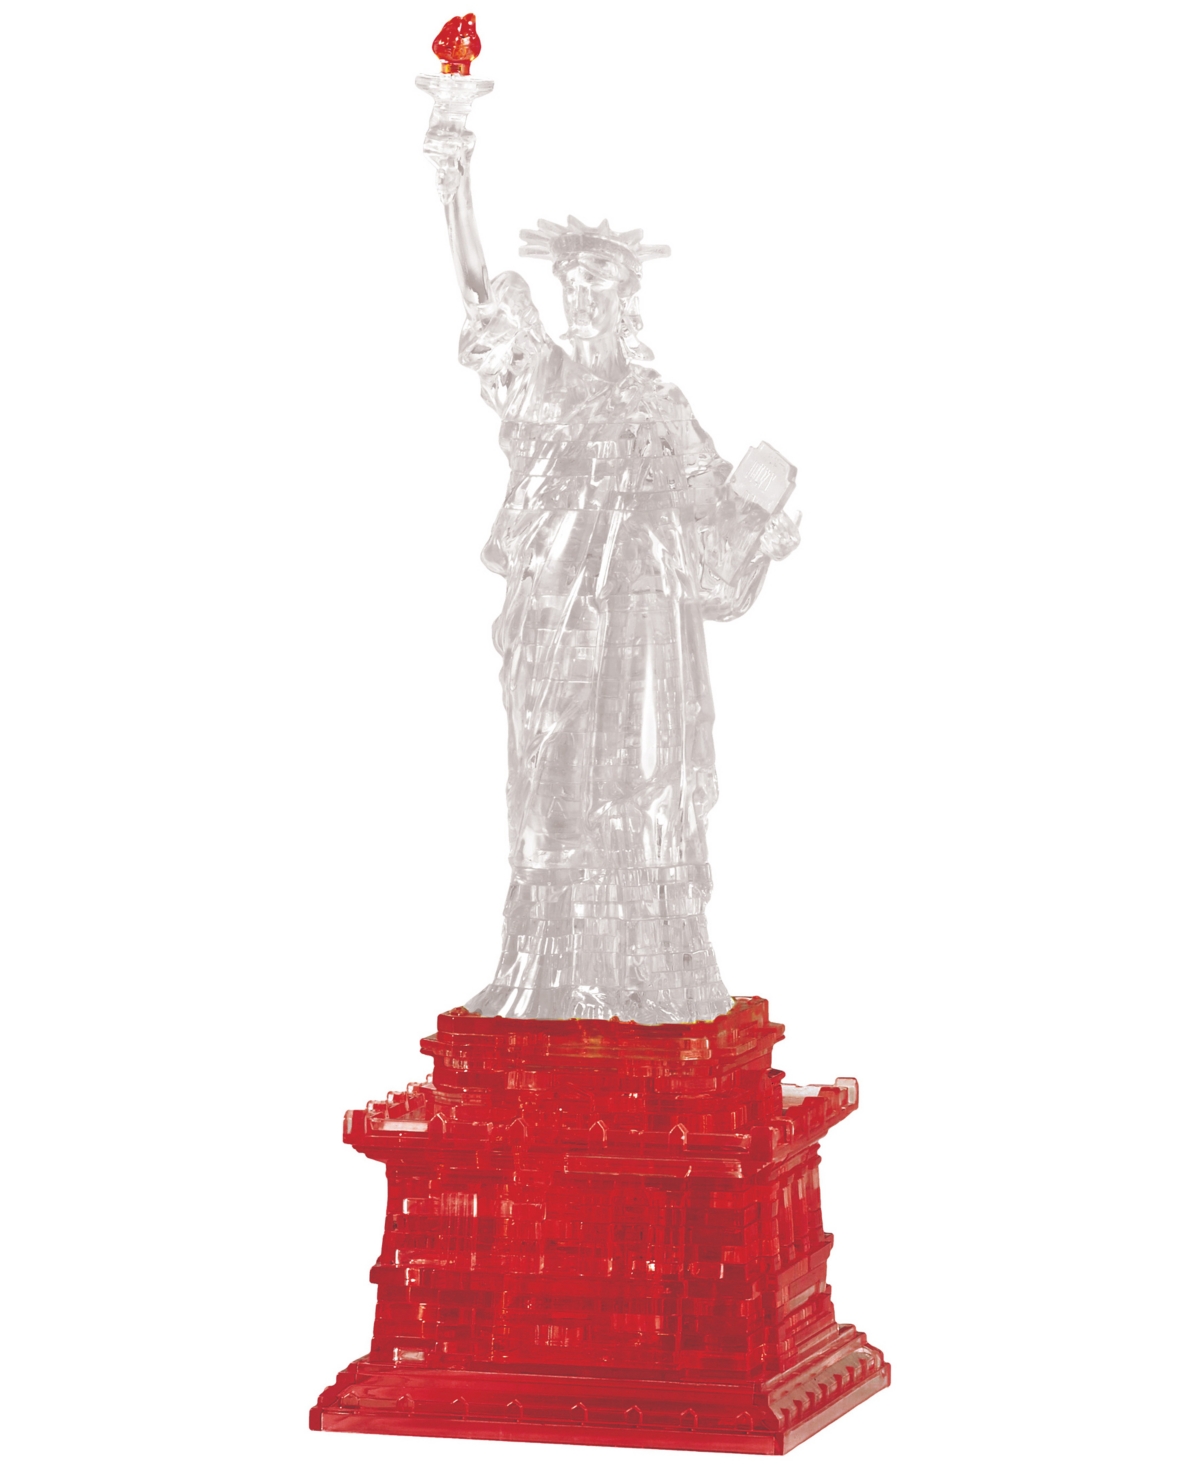 University Games Kids' Bepuzzled 3d Crystal Puzzle Statue Of Liberty, 78 Pieces In No Color